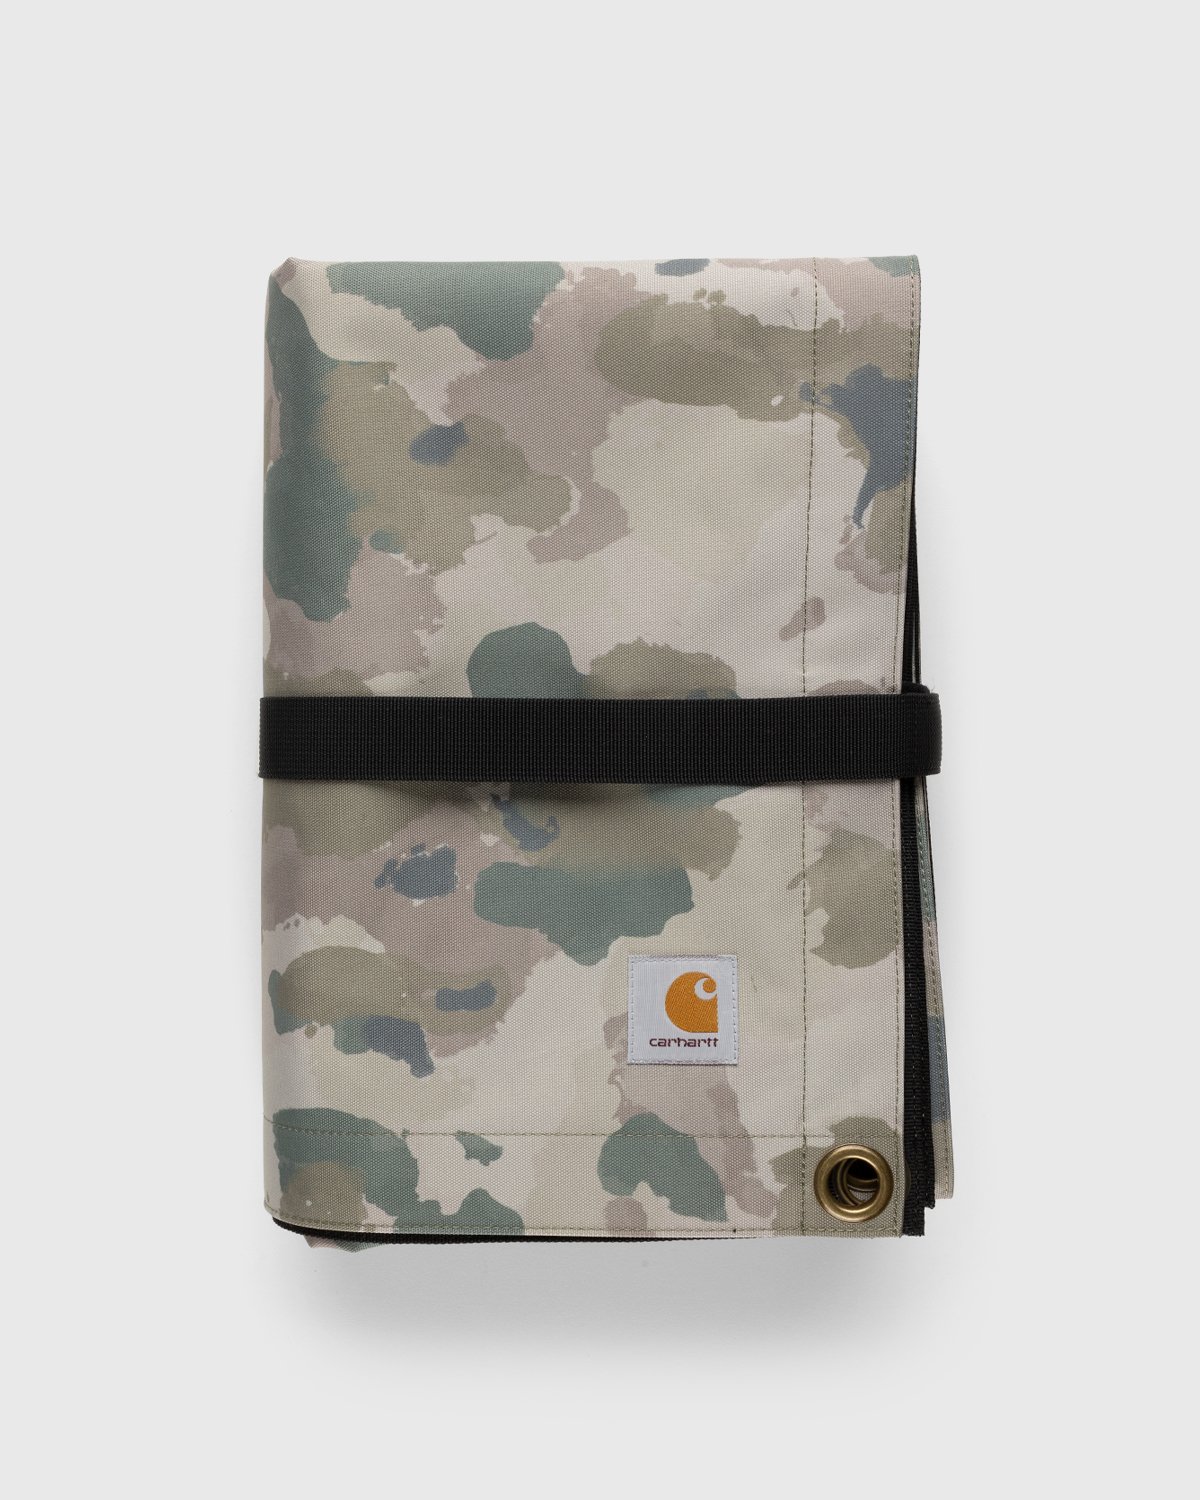 Carhartt WIP - Picnic Blanket Camo Tide Thyme - Lifestyle - Green - Image 3